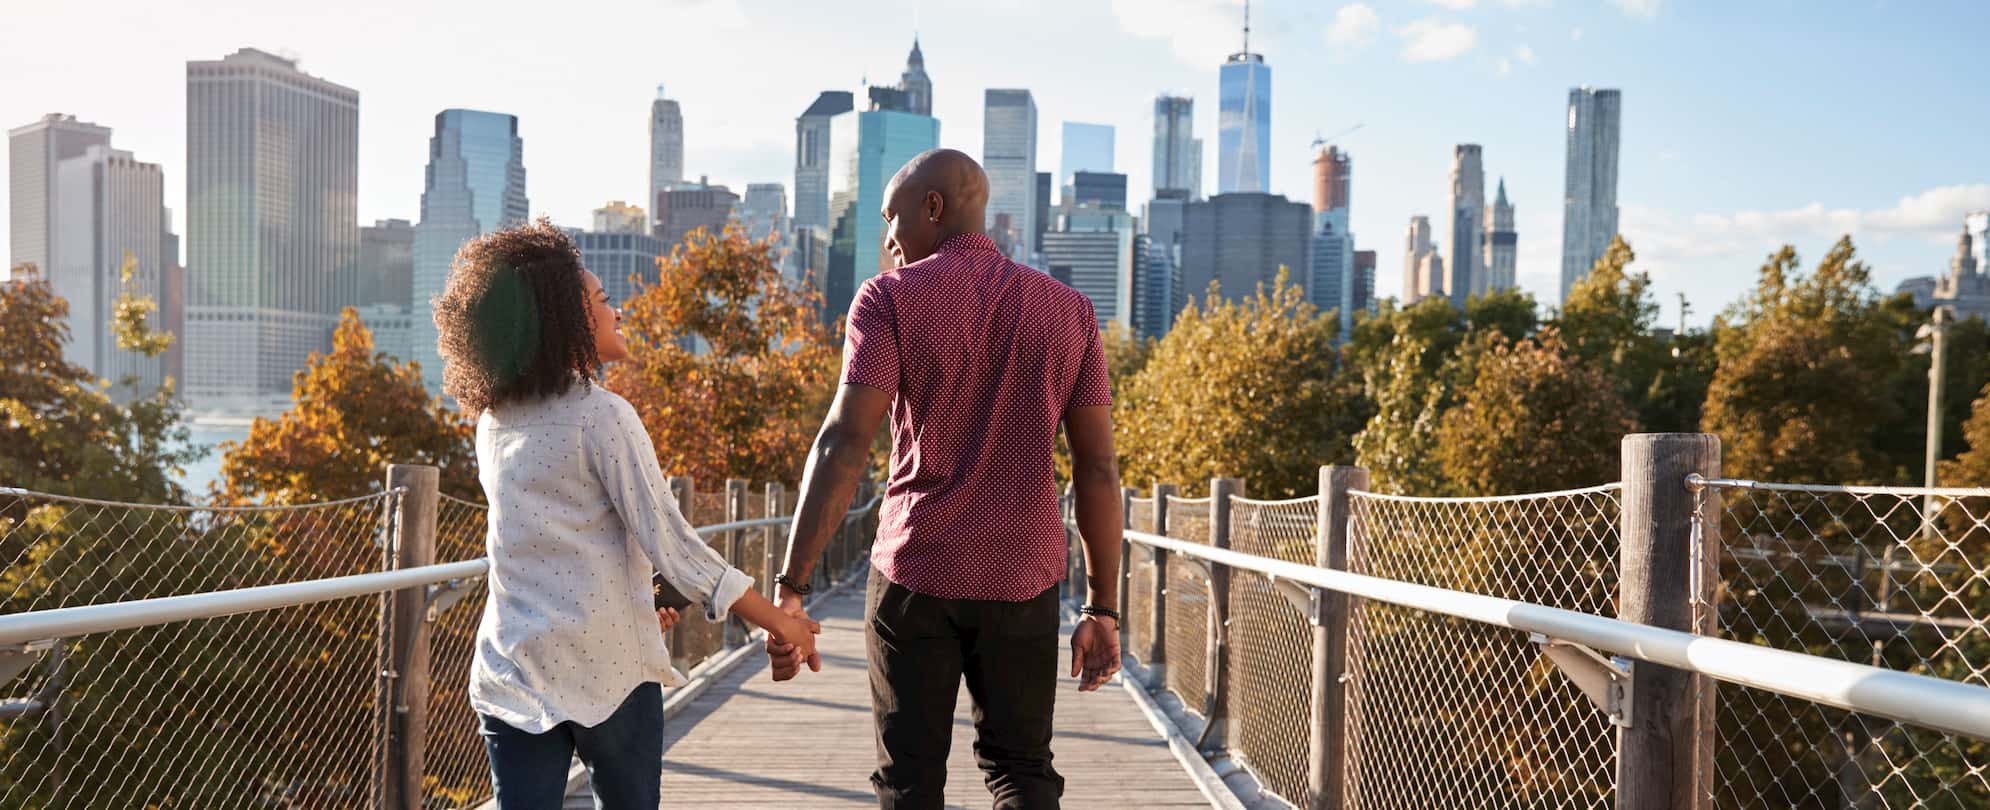 A man and a woman hold hands as they walk down a nature bridge toward the city